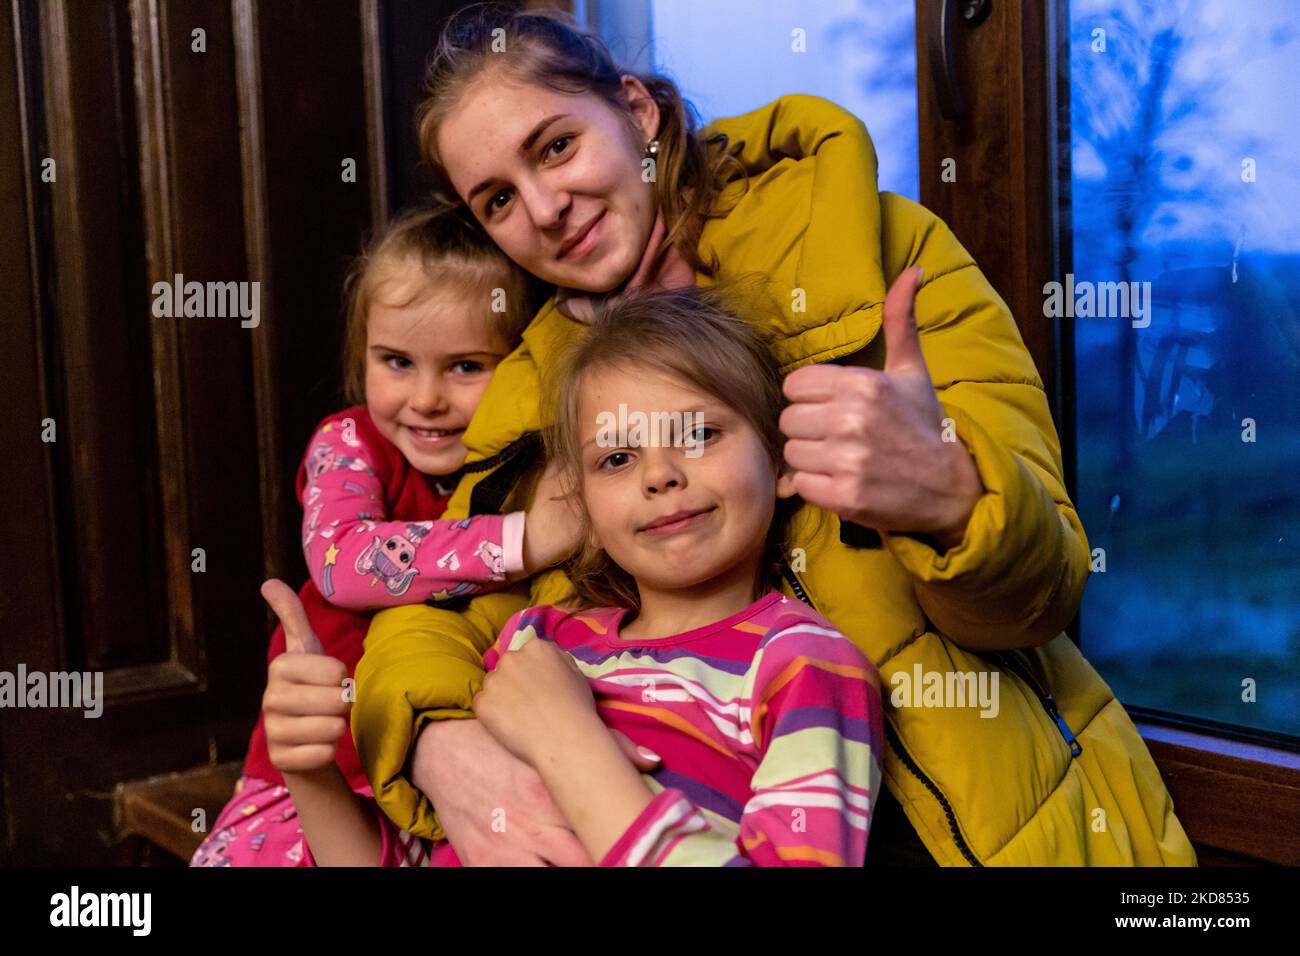 Ukrainian volunteer Maria poses with domestic refugee children who escaped from Kharkiv area to relative safety of Nadyby, Lviv Oblast, Ukraine on April 21, 2022. Since the Russian Federation invaded Ukraine, the conflict forced over 10 million people to flee their homes, both internally and externally. Greek-Catholic Church in Nadyby near Lviv hosts dozens of mothers with children who fled the war in eastern part of Ukraine and supports many more refugees in the area. The families found shelter in the Center for the Pastoral Care of Priests and Monks in Nadyby. (Photo by Dominika Zarzycka/Nur Stock Photo